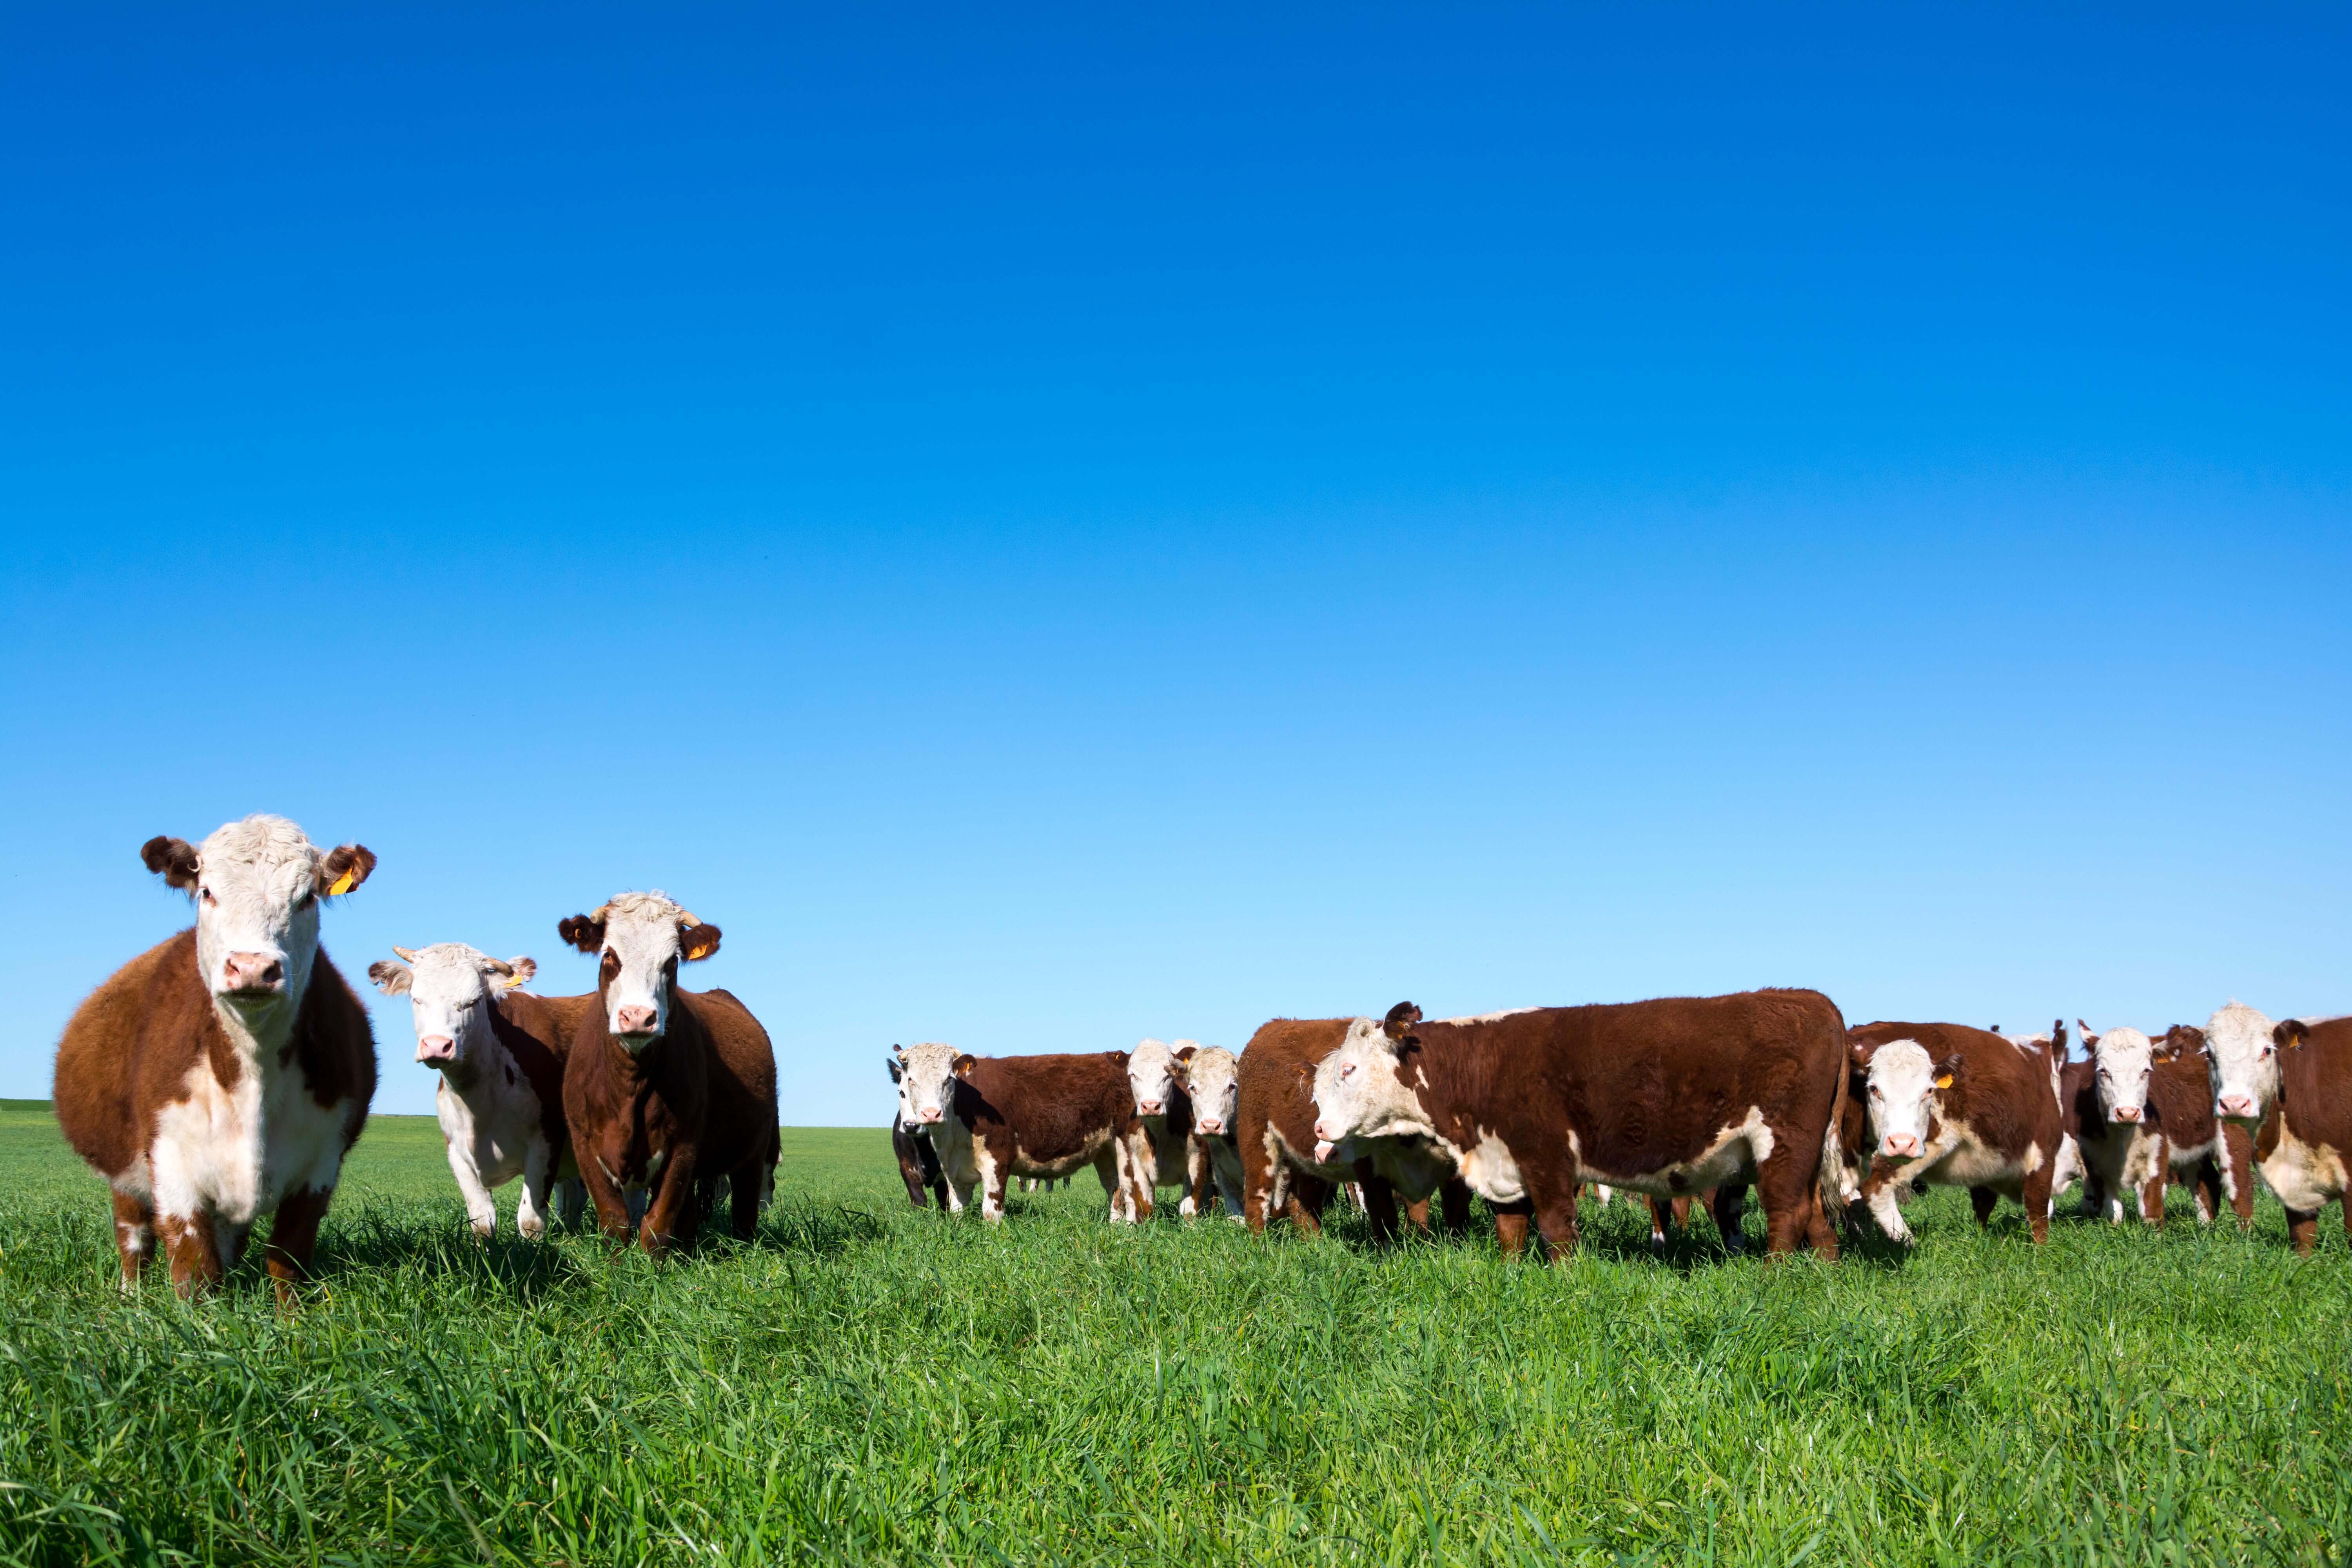 A herd of brown Canadian cattle grazing in a field.